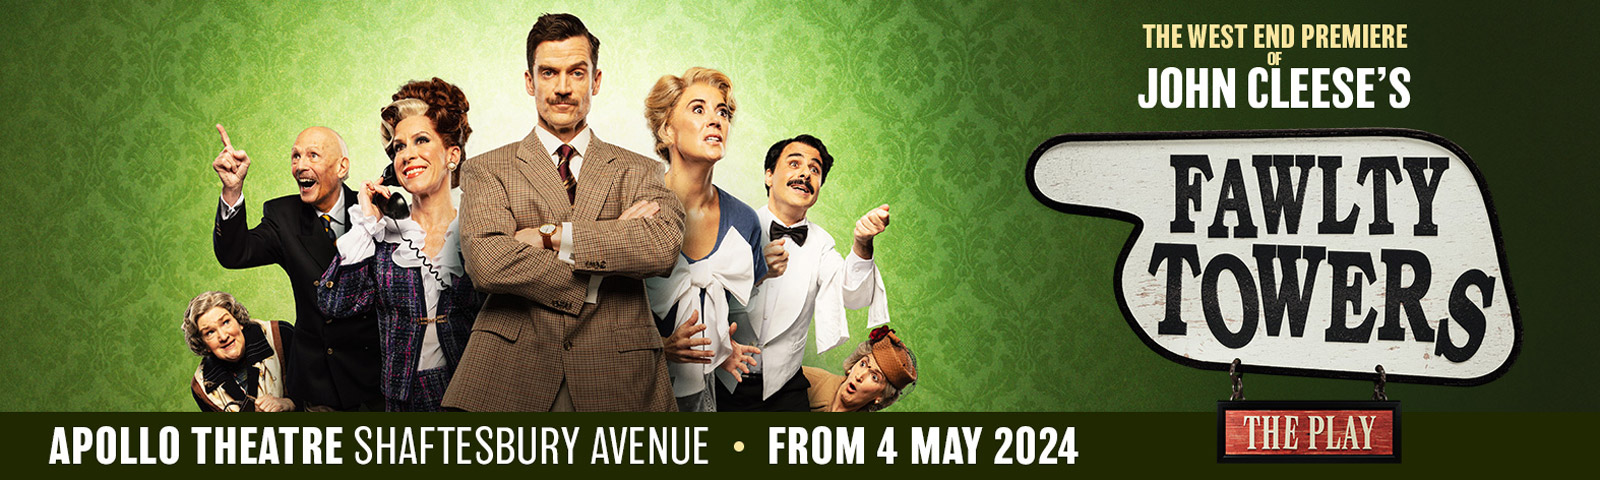 fawlty-towers-live-tickets